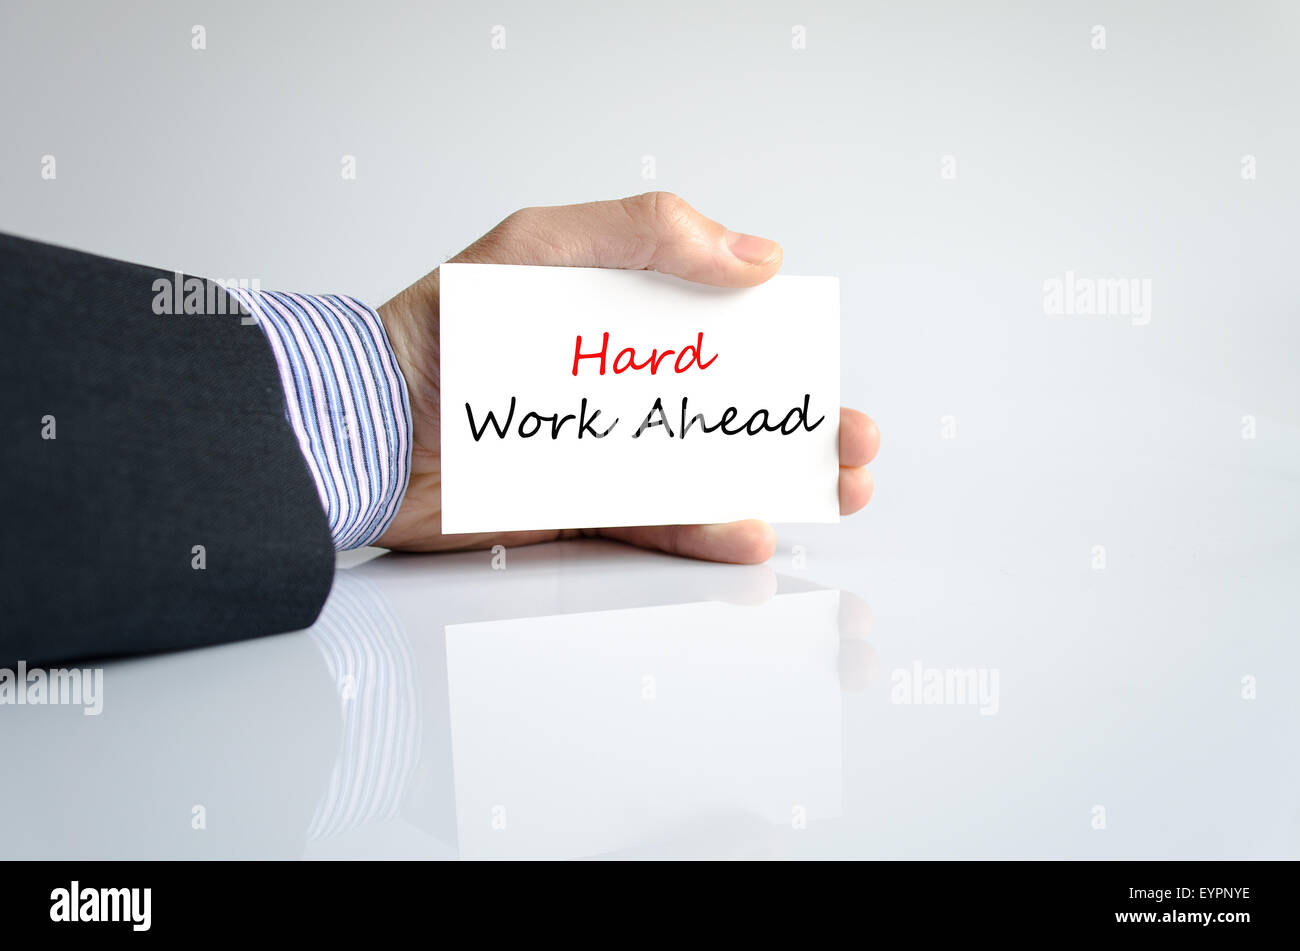 Hard work ahead hand concept isolated over white background Stock Photo